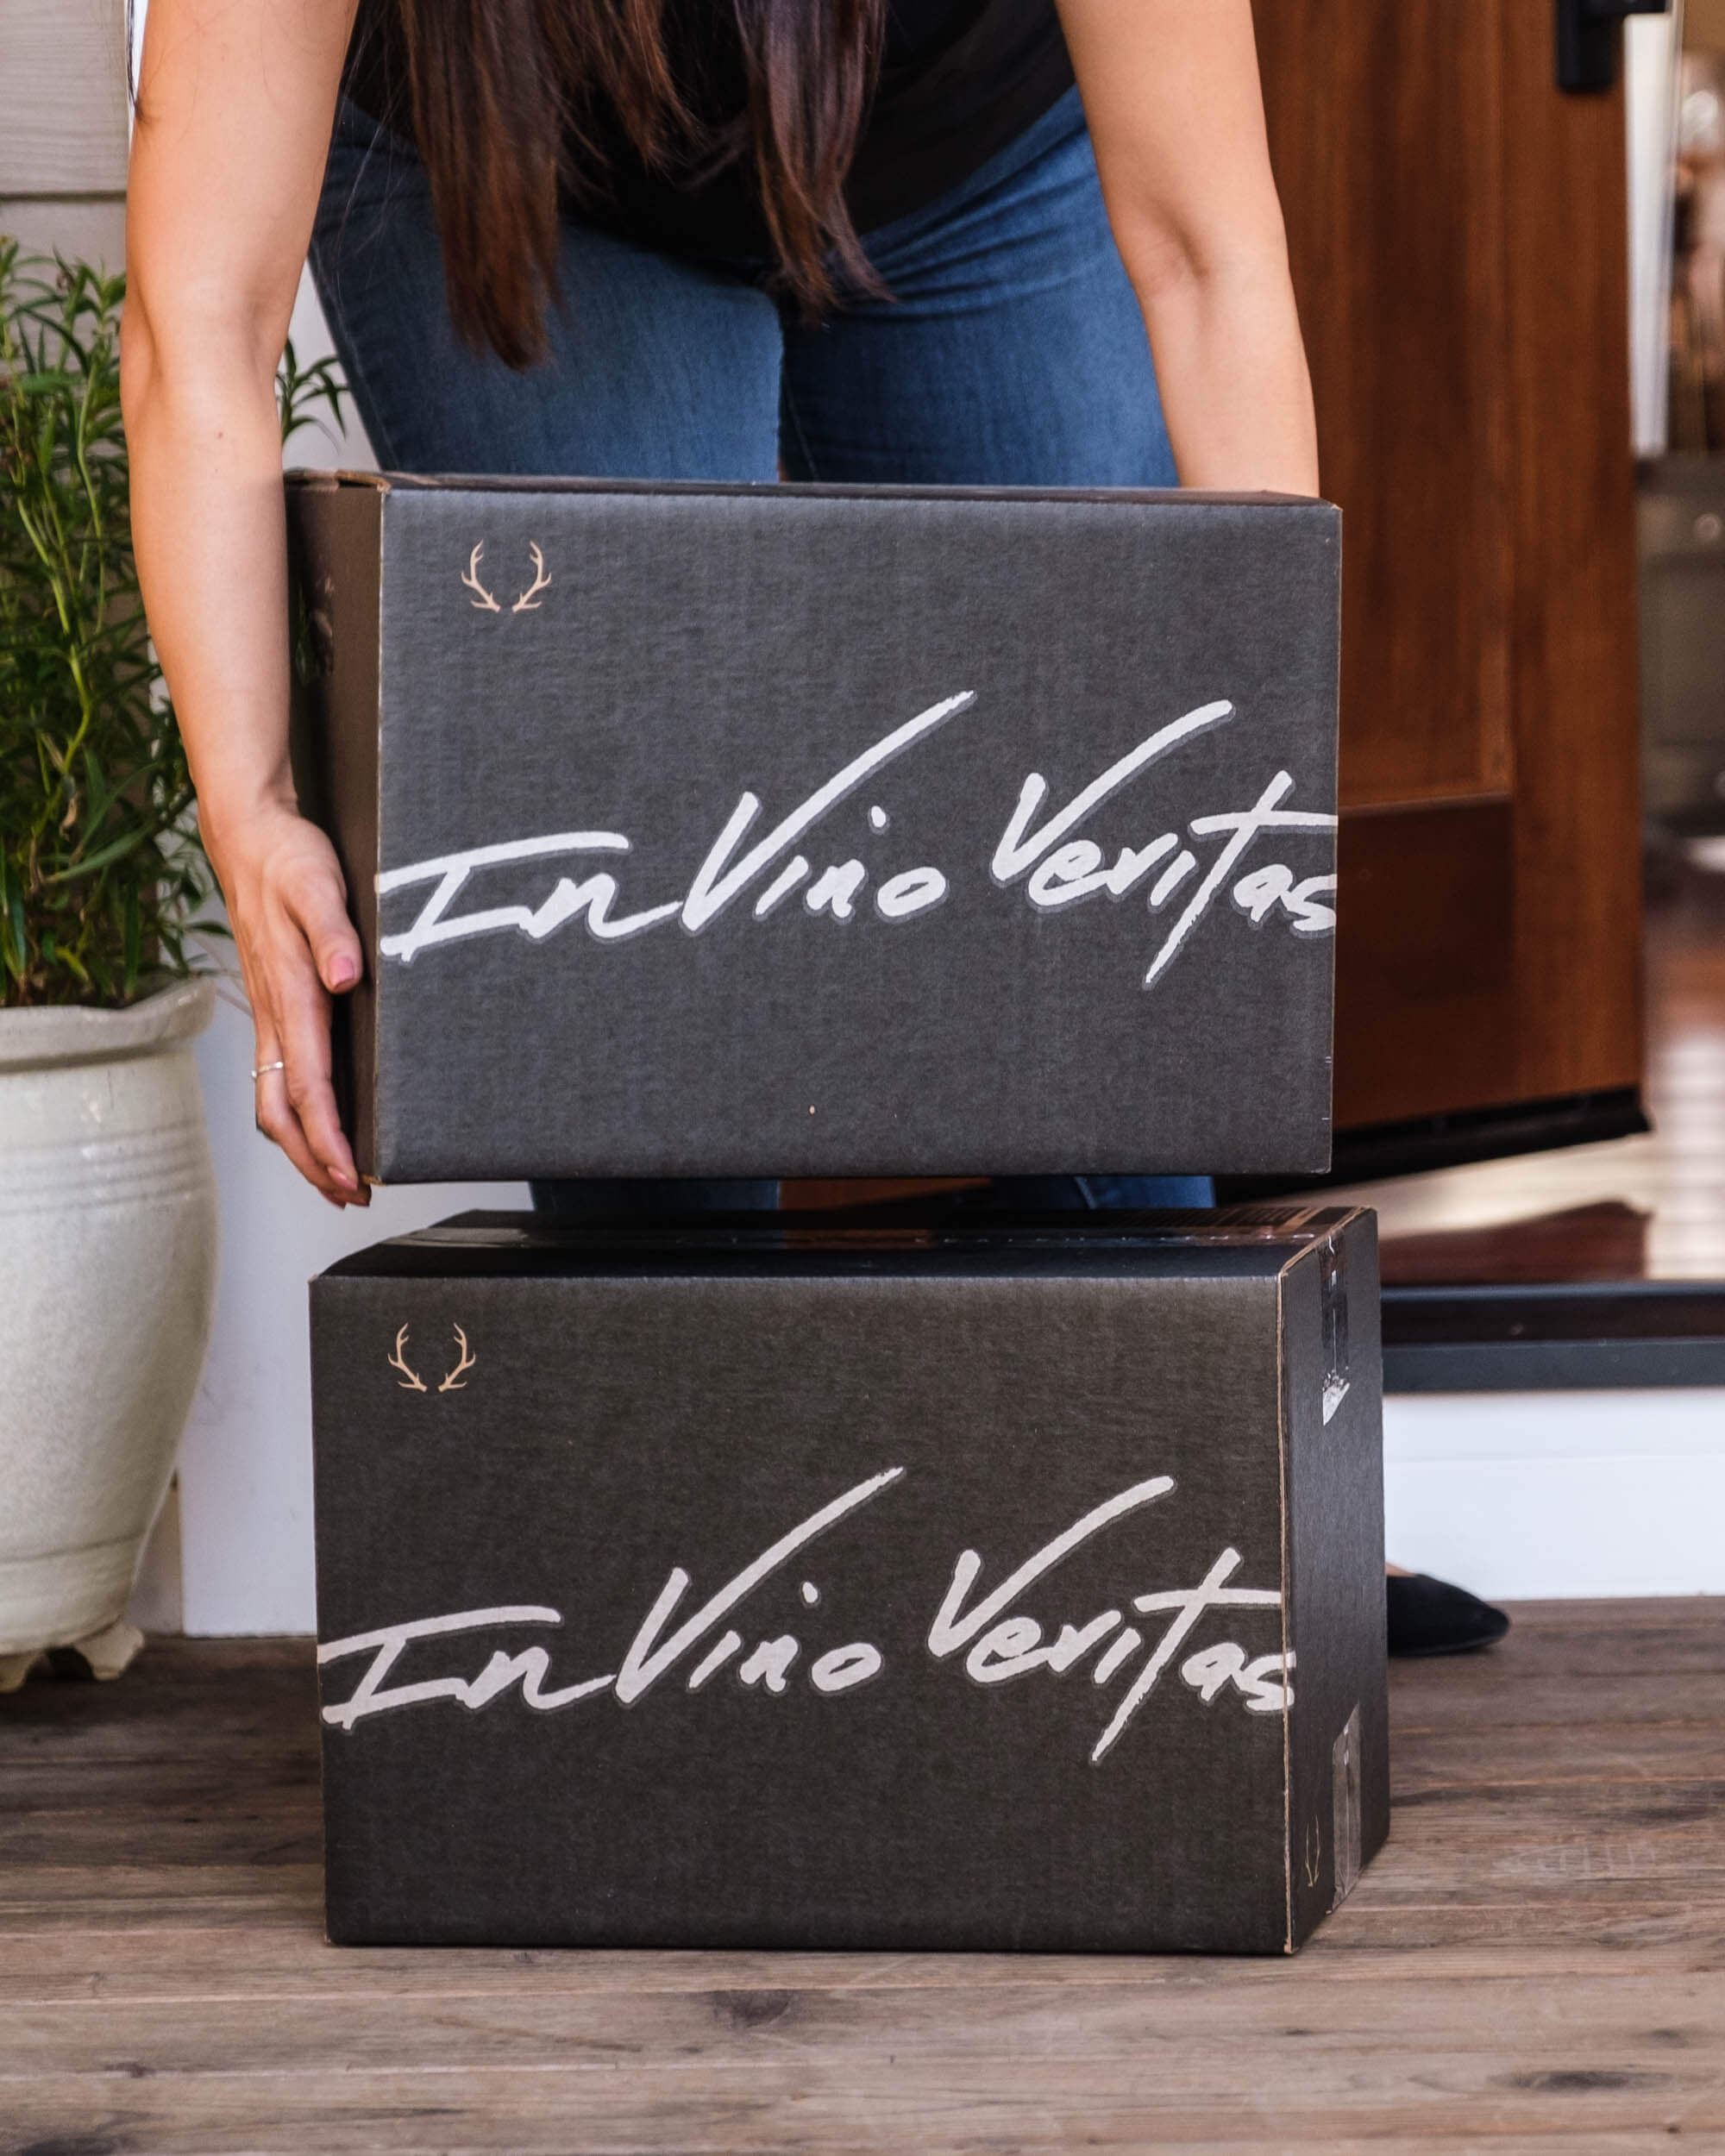 A woman picks up a box from Dry Farm Wines off a porch. The boxes read "In Vino Veritas" 